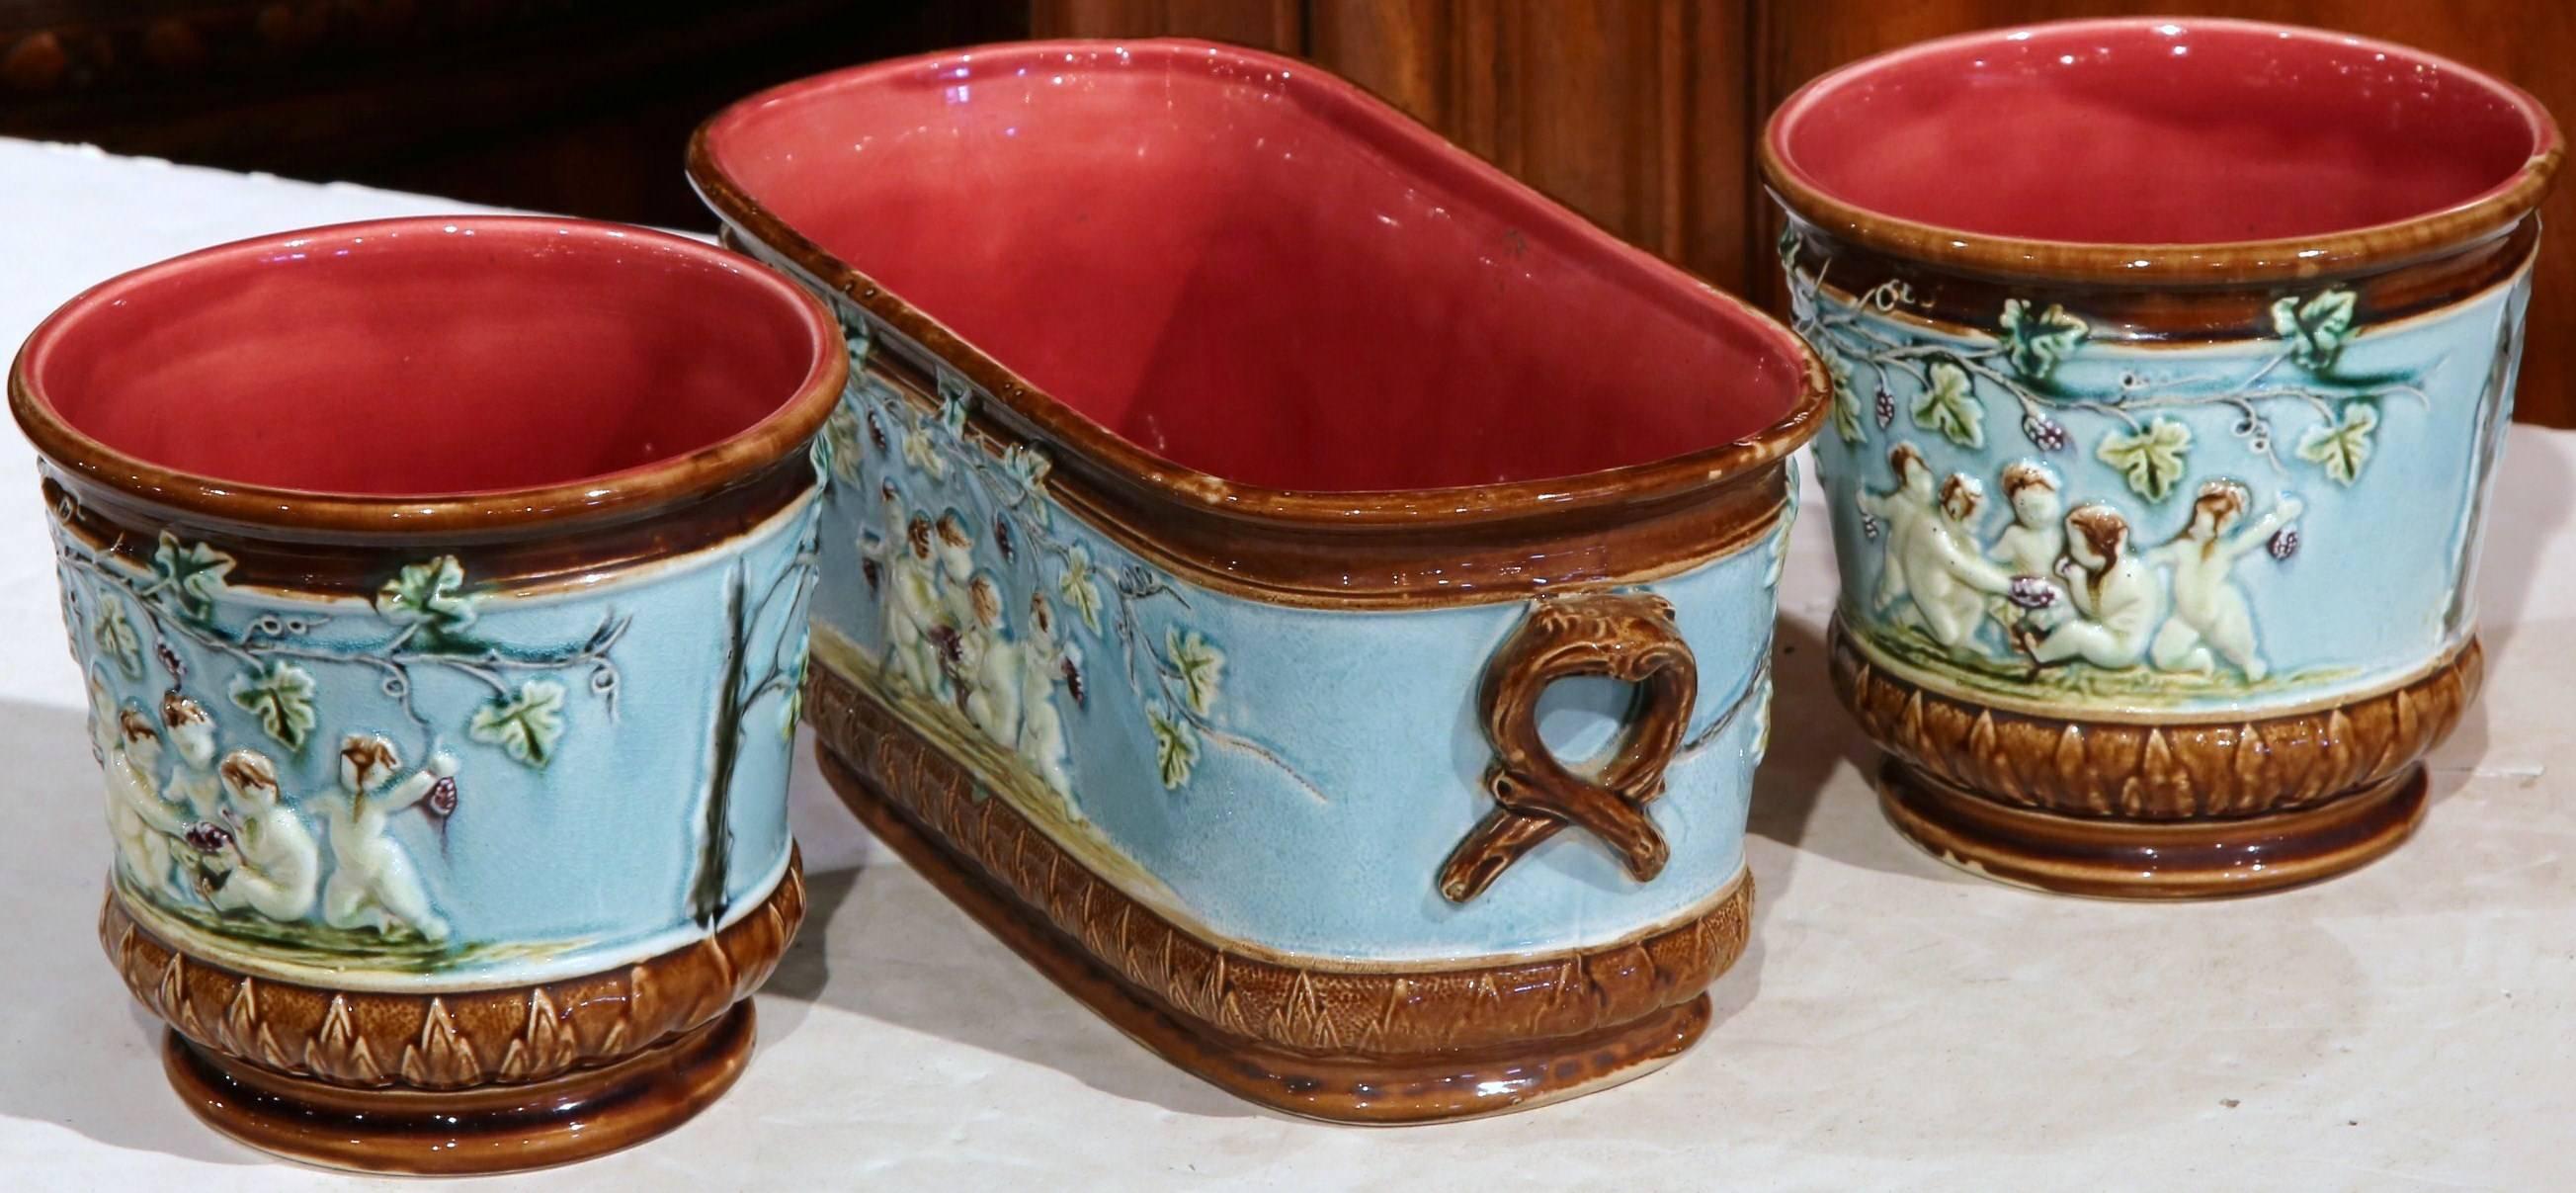 Ceramic 19th Century French Painted Barbotine Jardinière and Two Cachepots, 3 Pieces